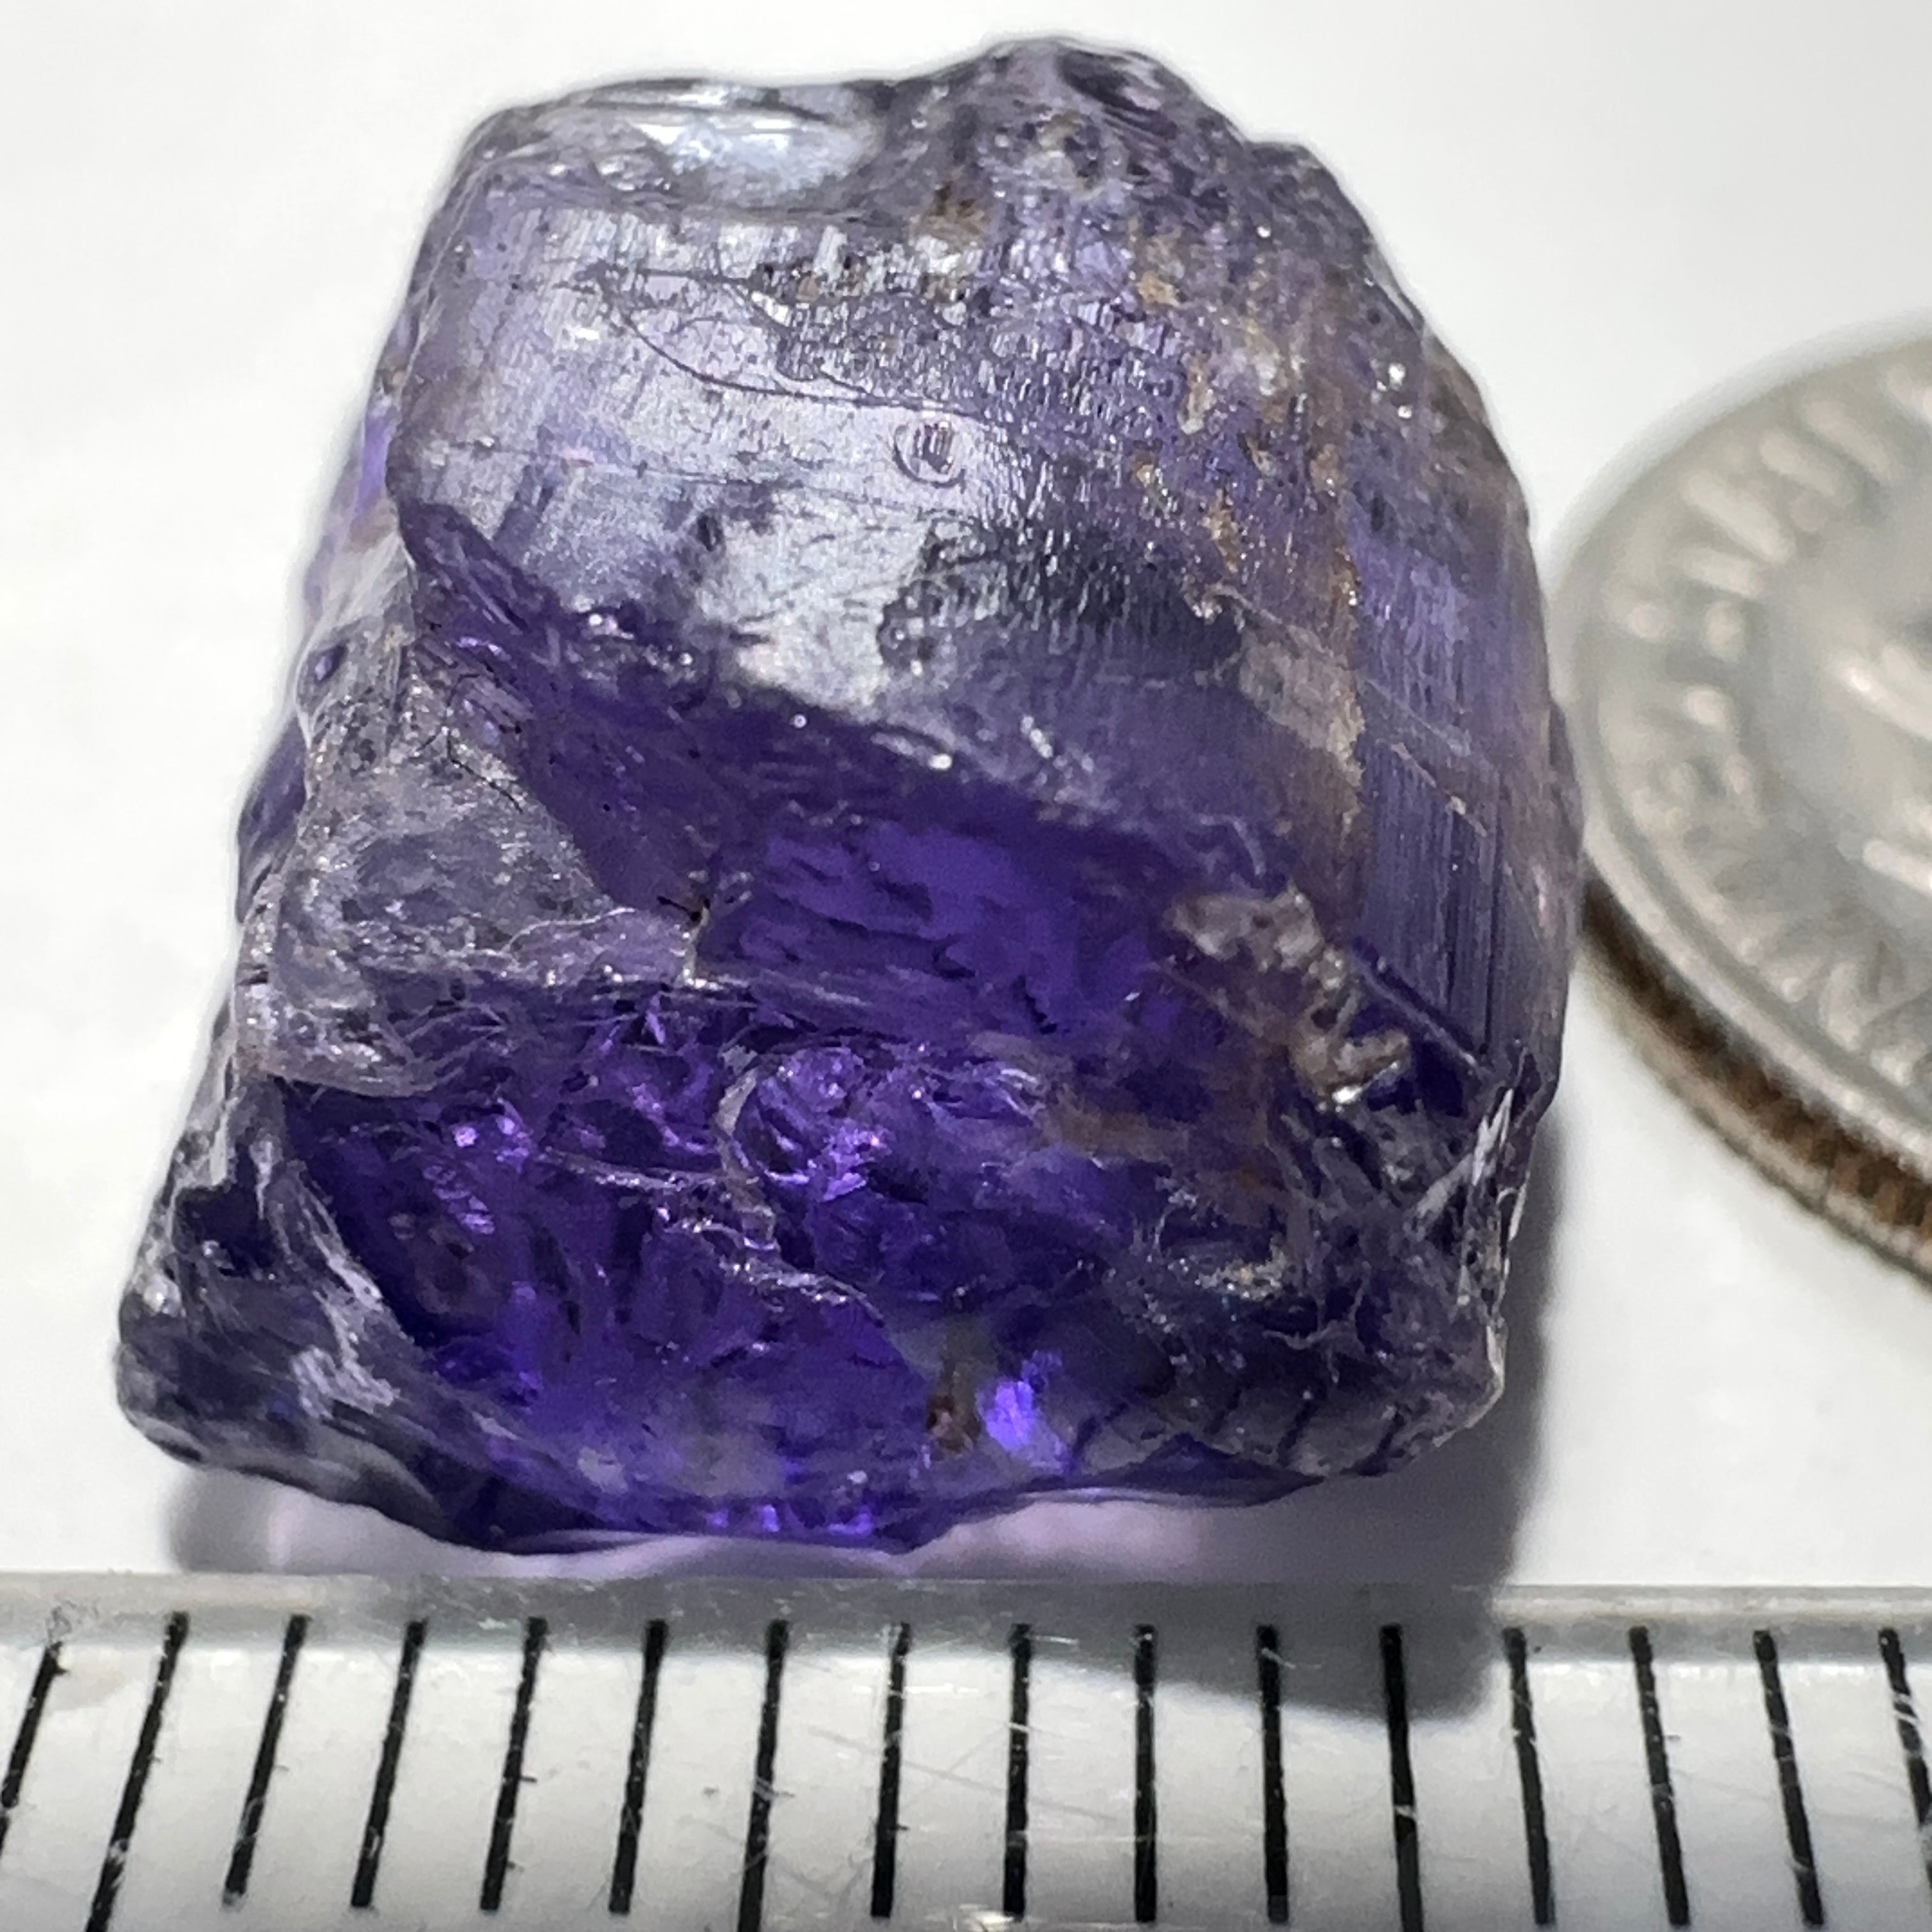 12.14ct Purple Scapolite Crystal, Tanzania, Untreated Unheated. Has a dividing crack, will need to be sawed, one side will be vvs-if clean, the other will be the same but will need some inclusions on the outside removed.